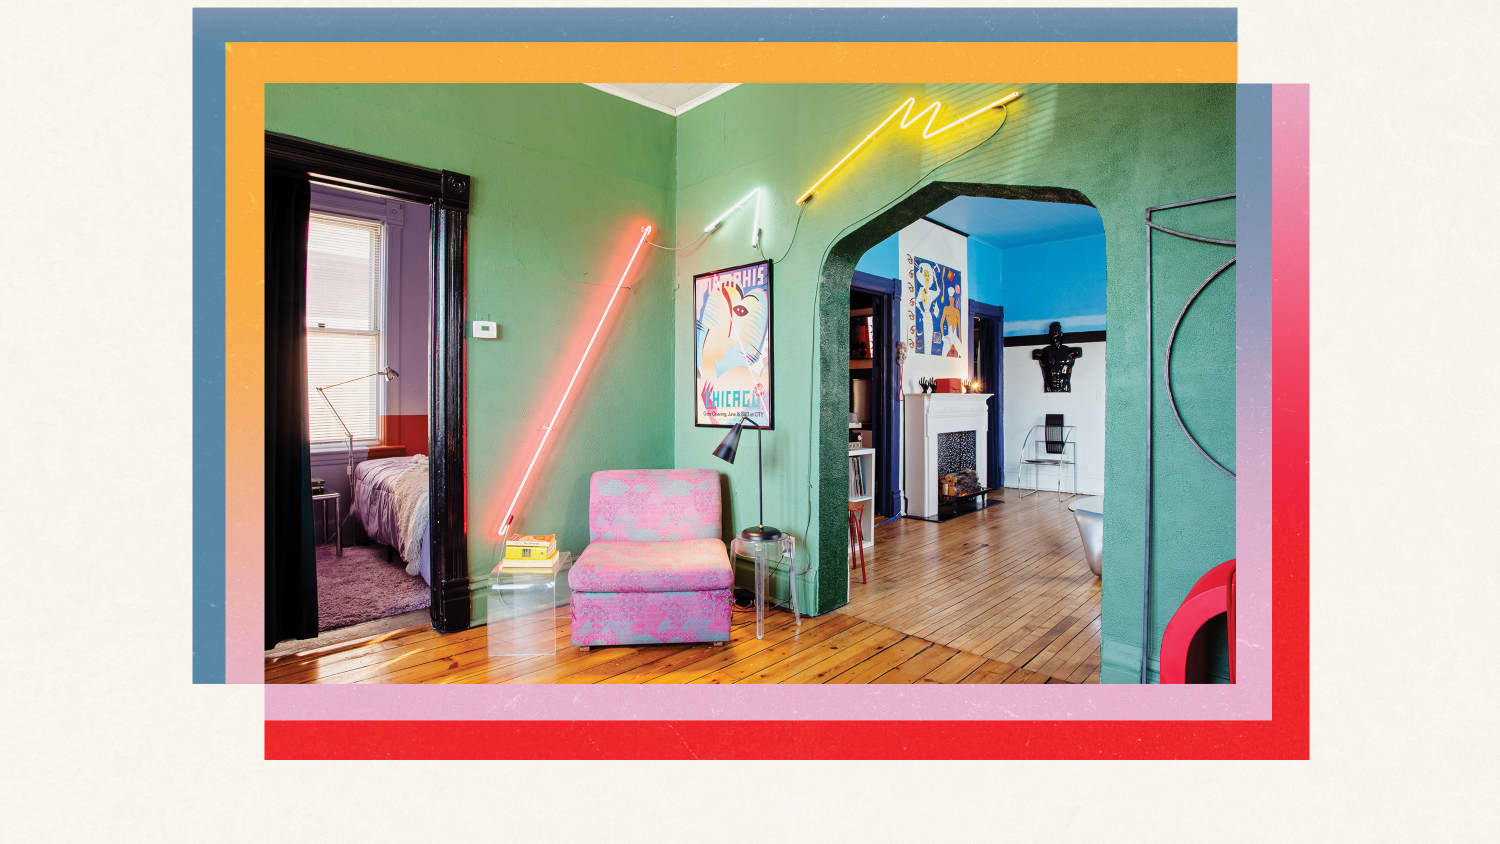 Ledningsevne kristen tragedie Here's Why '80s Design Huge Right Now | Apartment Therapy